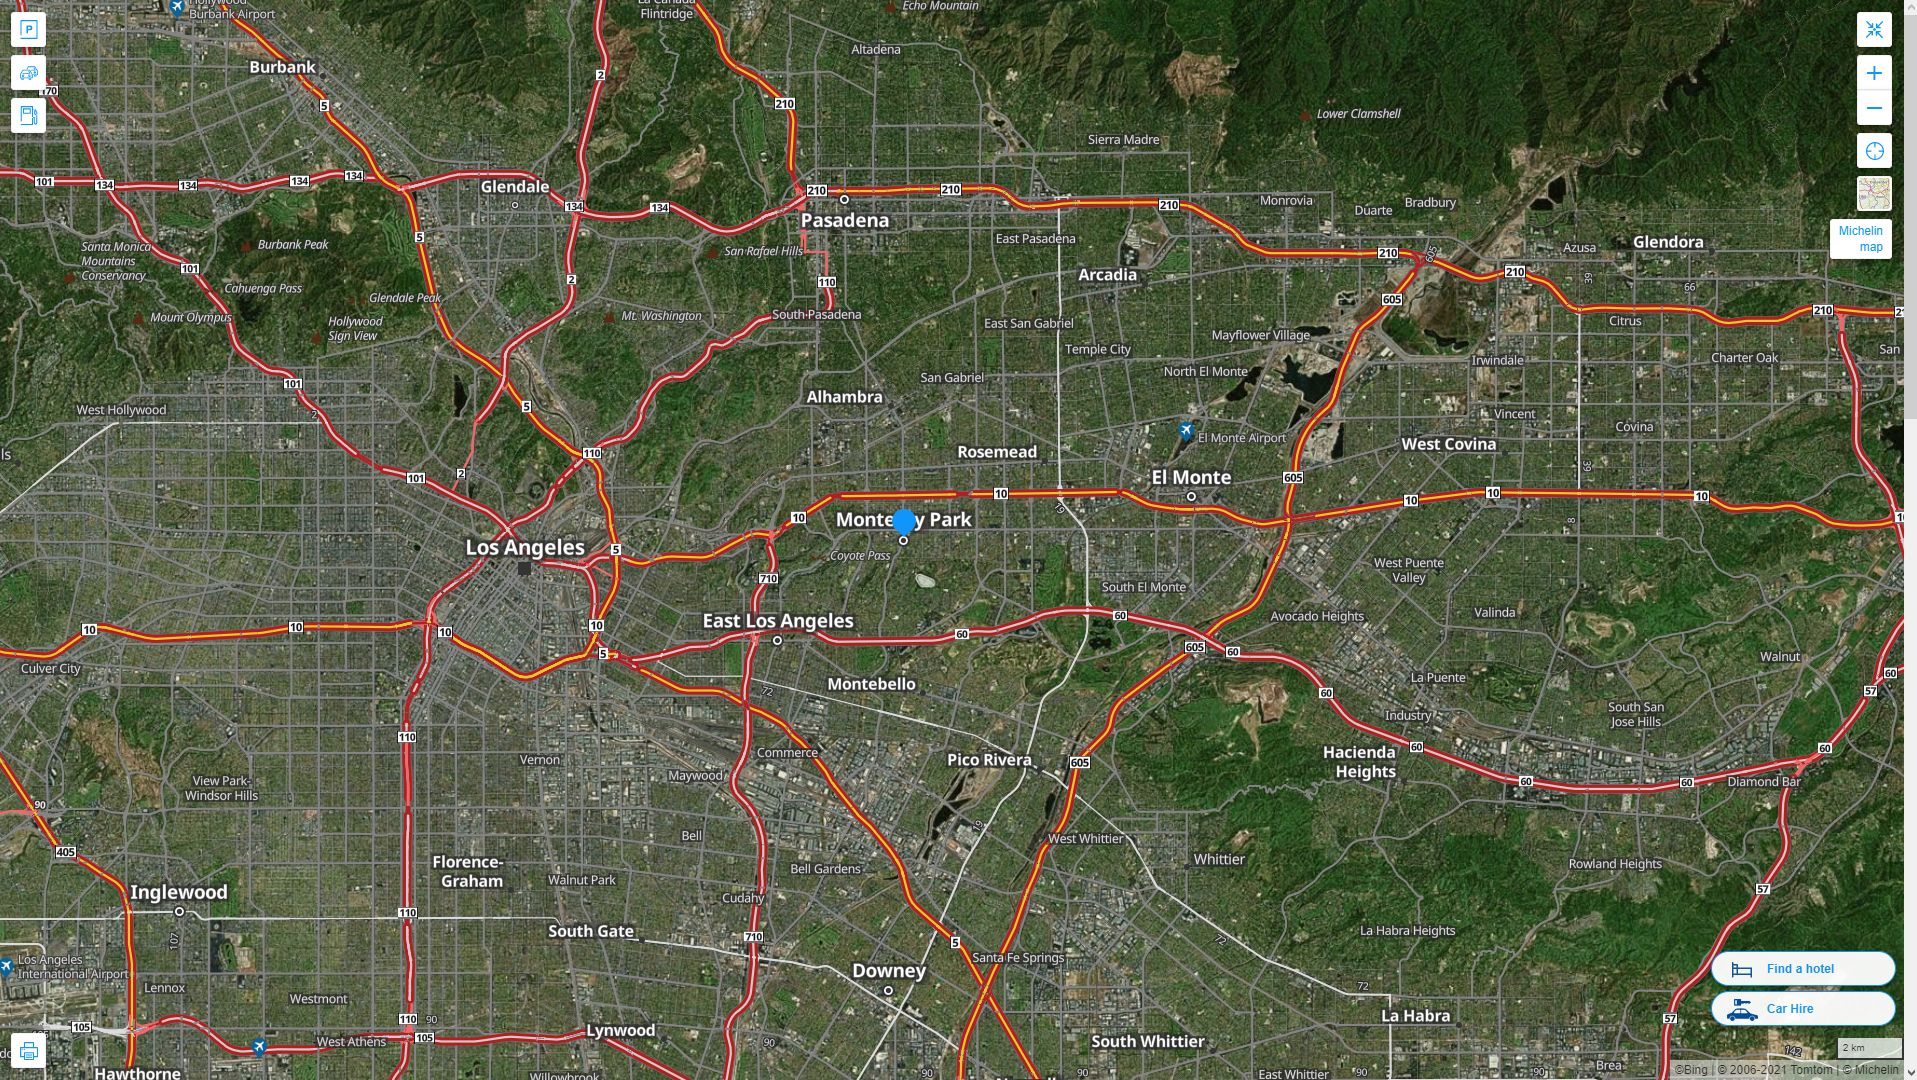 Monterey Park California Highway and Road Map with Satellite View